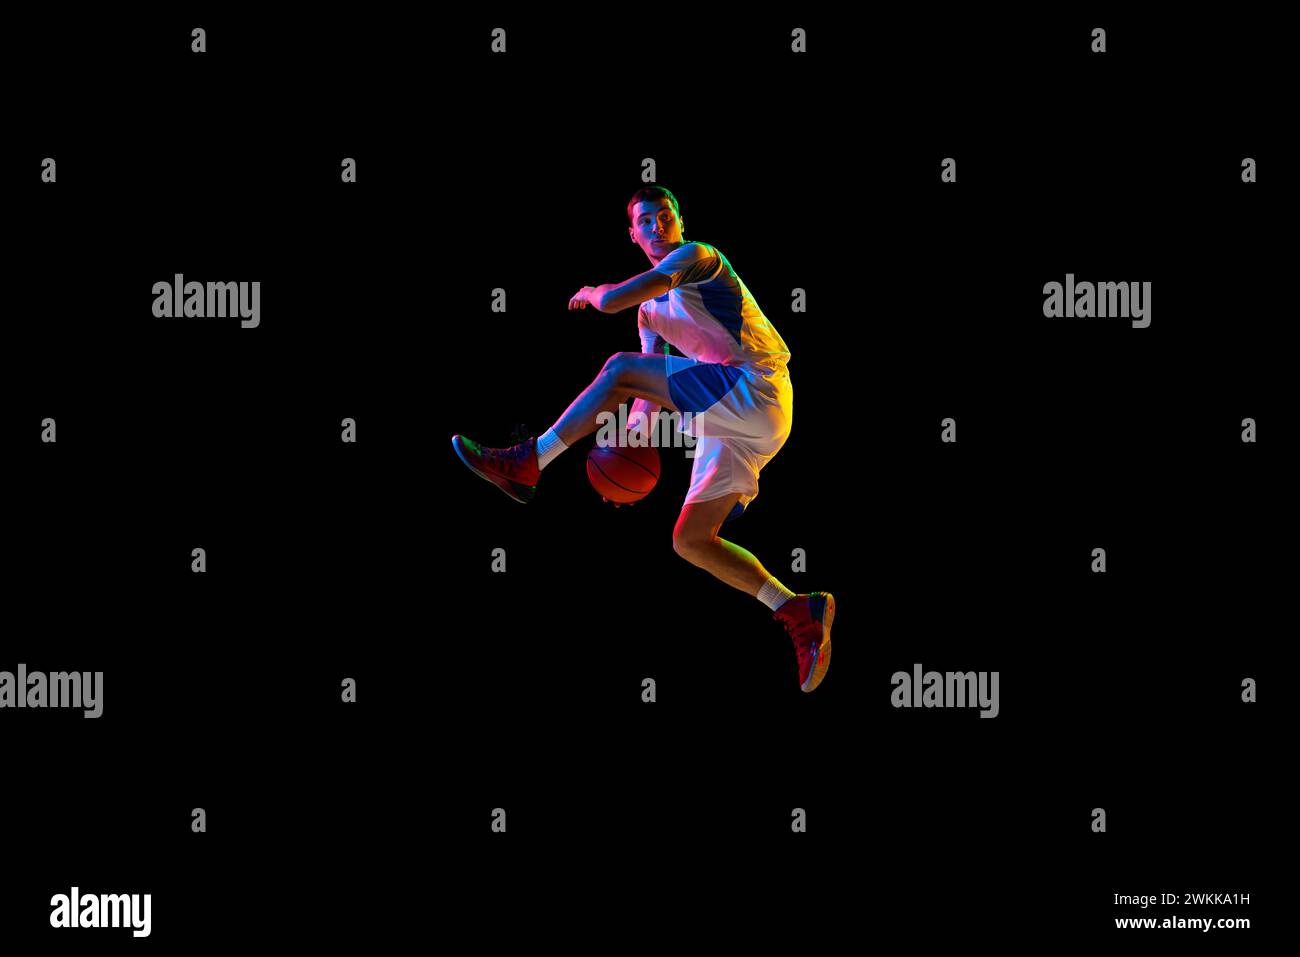 Action shot of basketball player's crossover dribble against black studio background in mixed neon light. Stock Photo